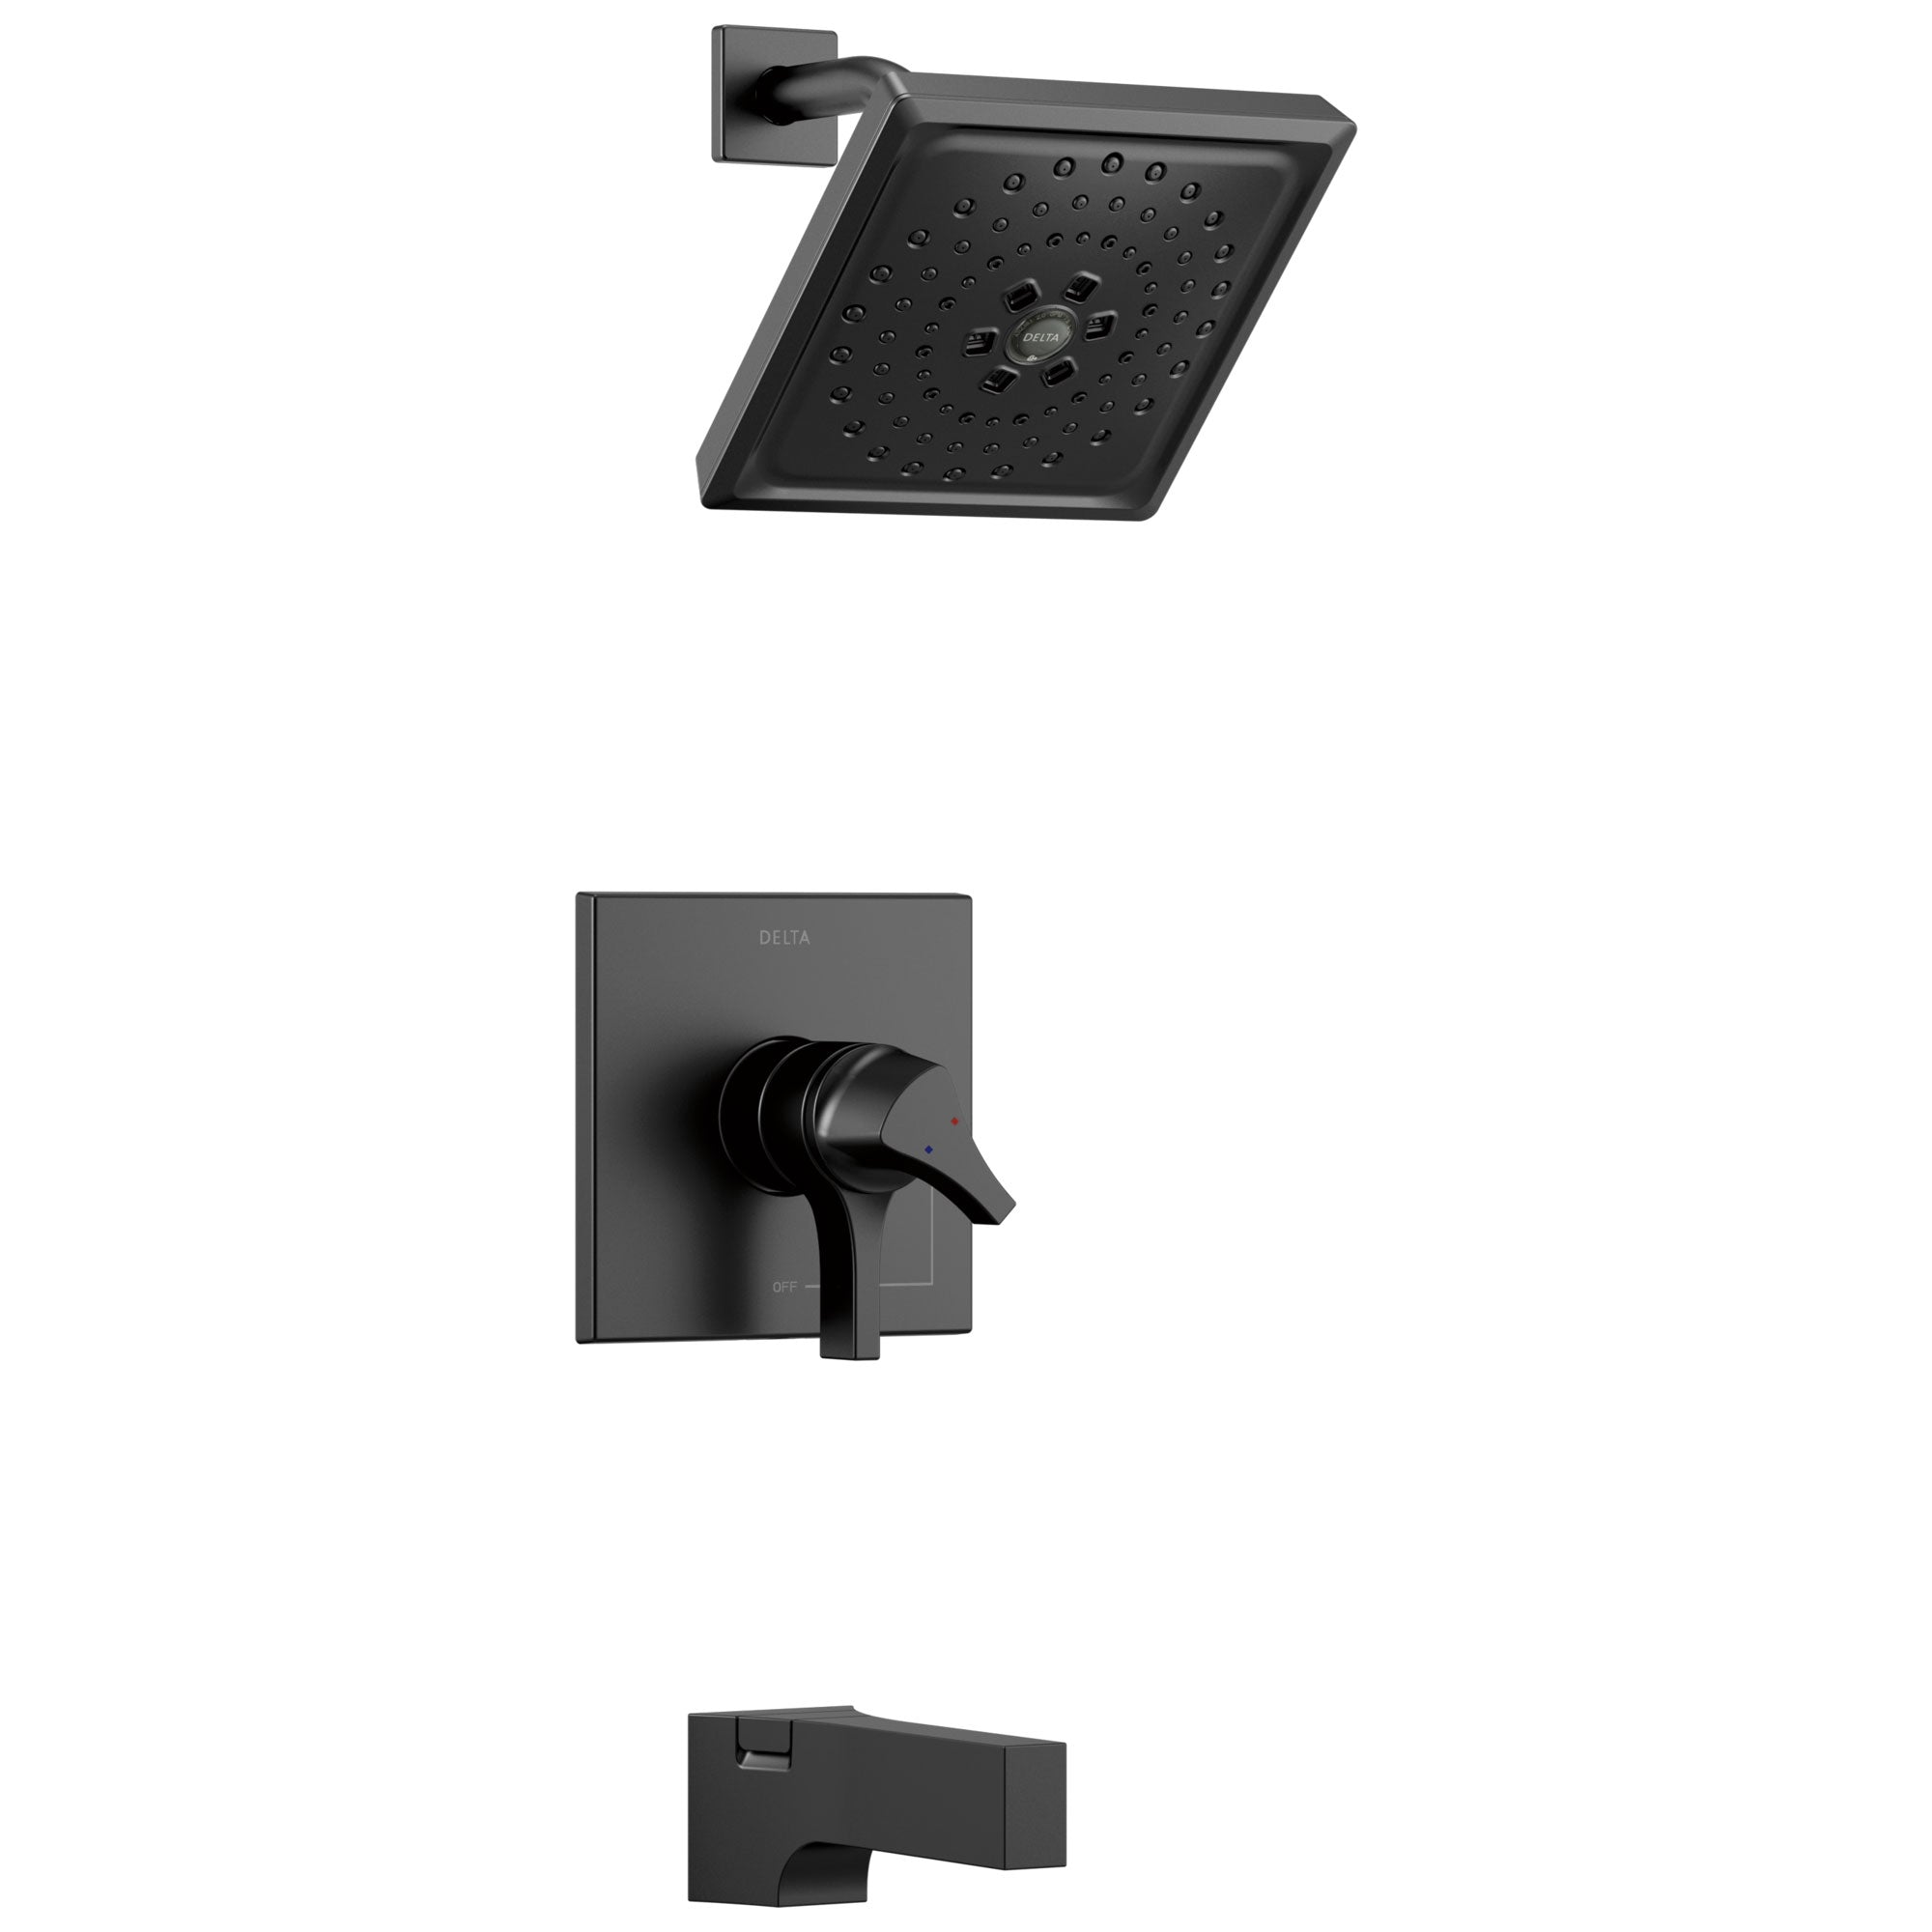 Delta Zura Matte Black Finish 17 Series H2Okinetic Tub and Shower Combination Faucet Includes Handles, Cartridge, and Valve without Stops D3632V